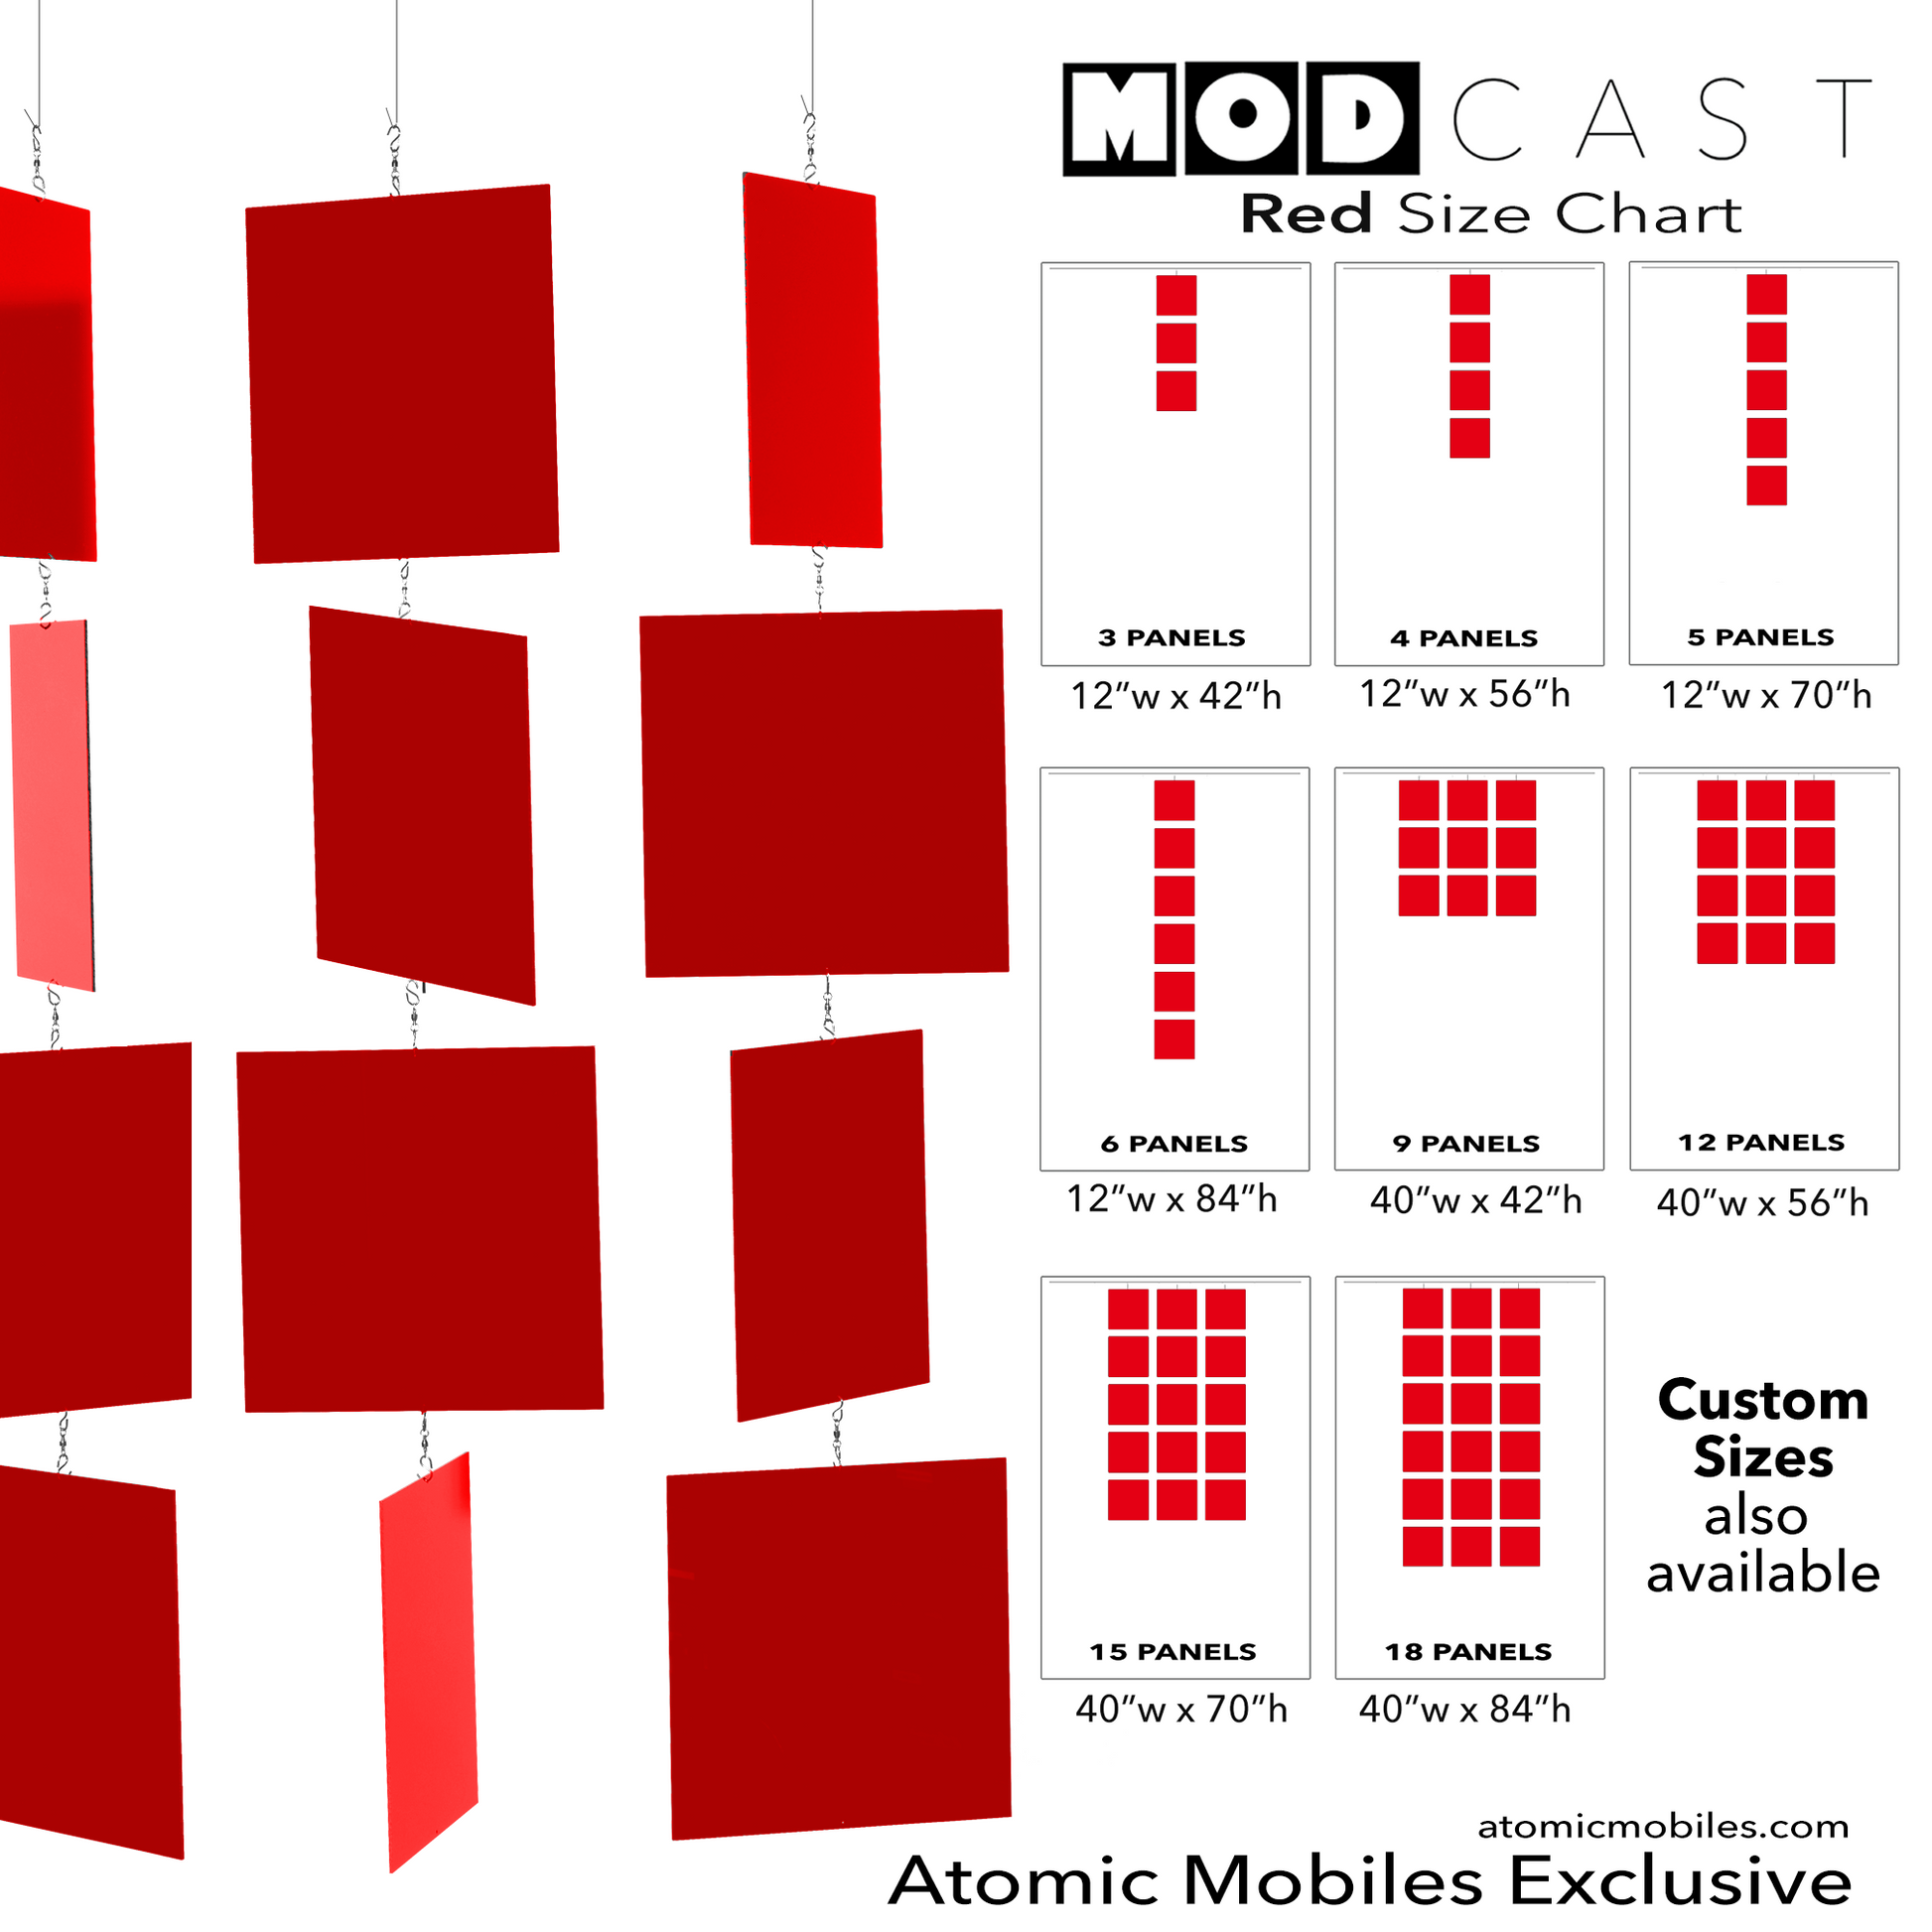 Size Chart for Red MODcast Hanging Art Mobiles - mid century modern style kinetic art by AtomicMobiles.com